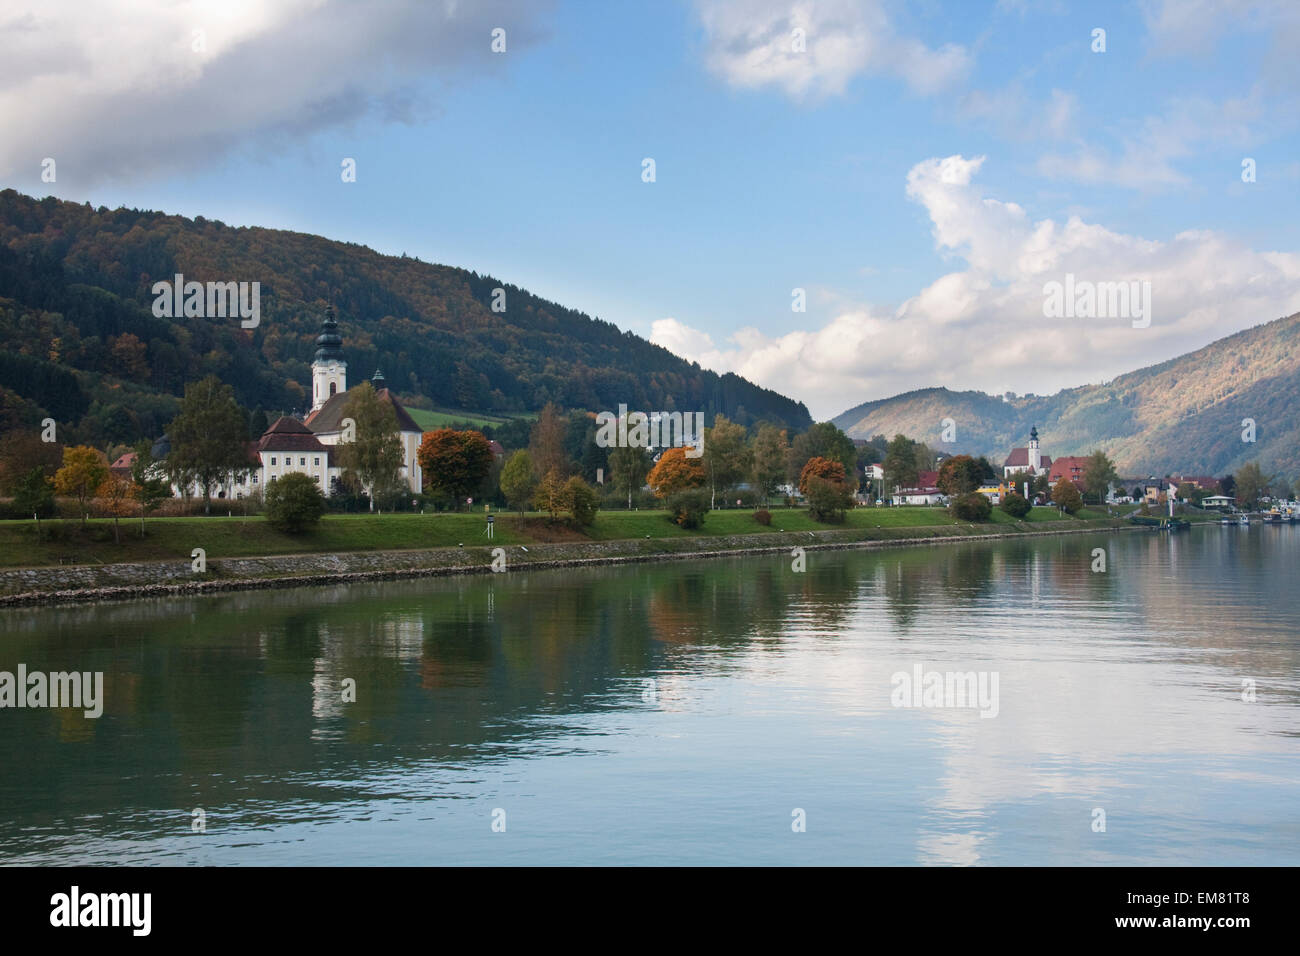 Panoramic view of Engelhartszell, as seen from the Danube River, Upper Austria, Austria Stock Photo